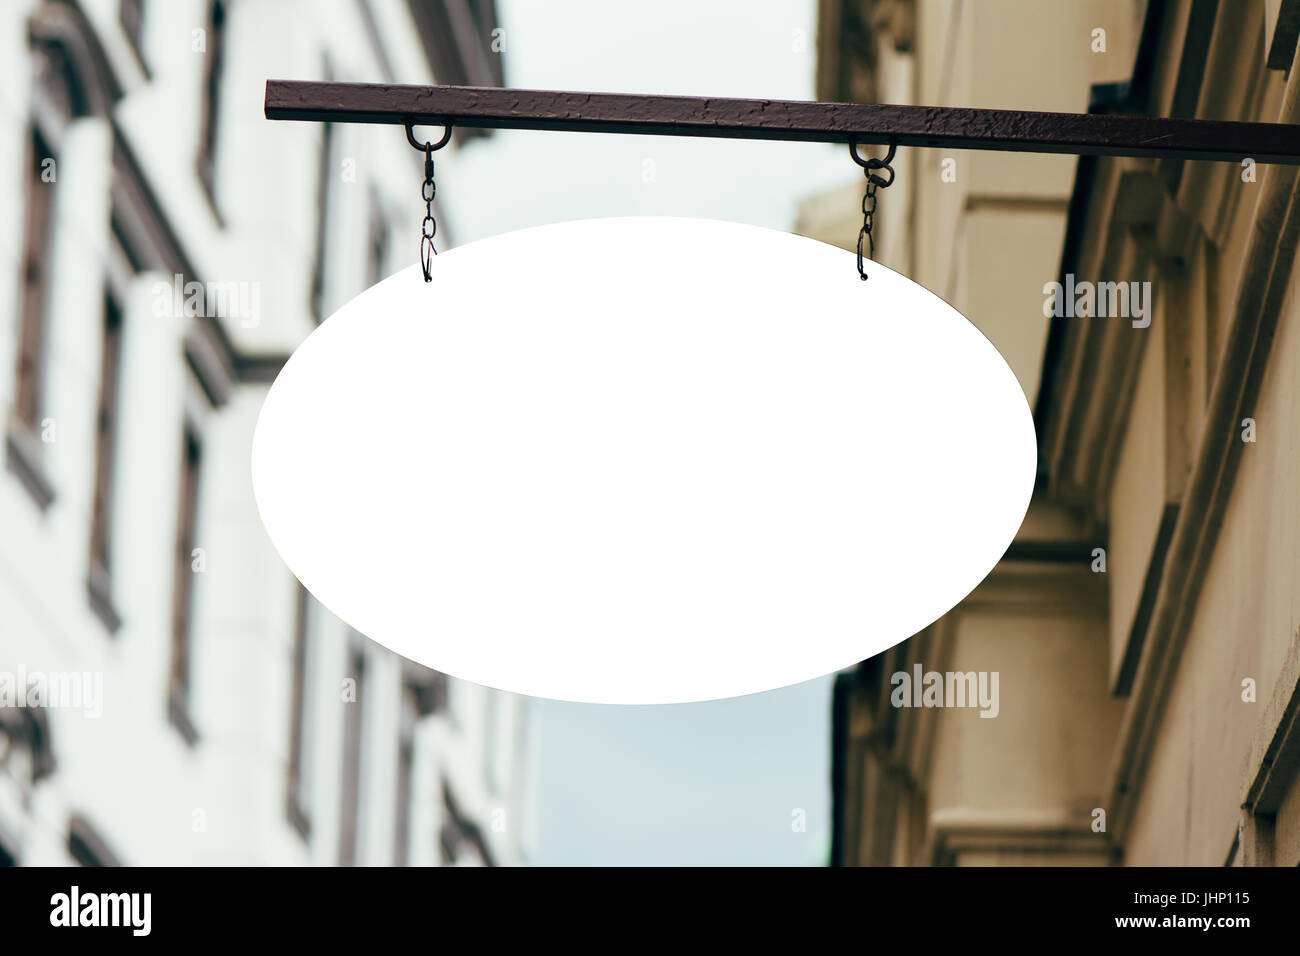 Blank Oval Signage hanging from wrought iron bracket, in the city Stock Photo